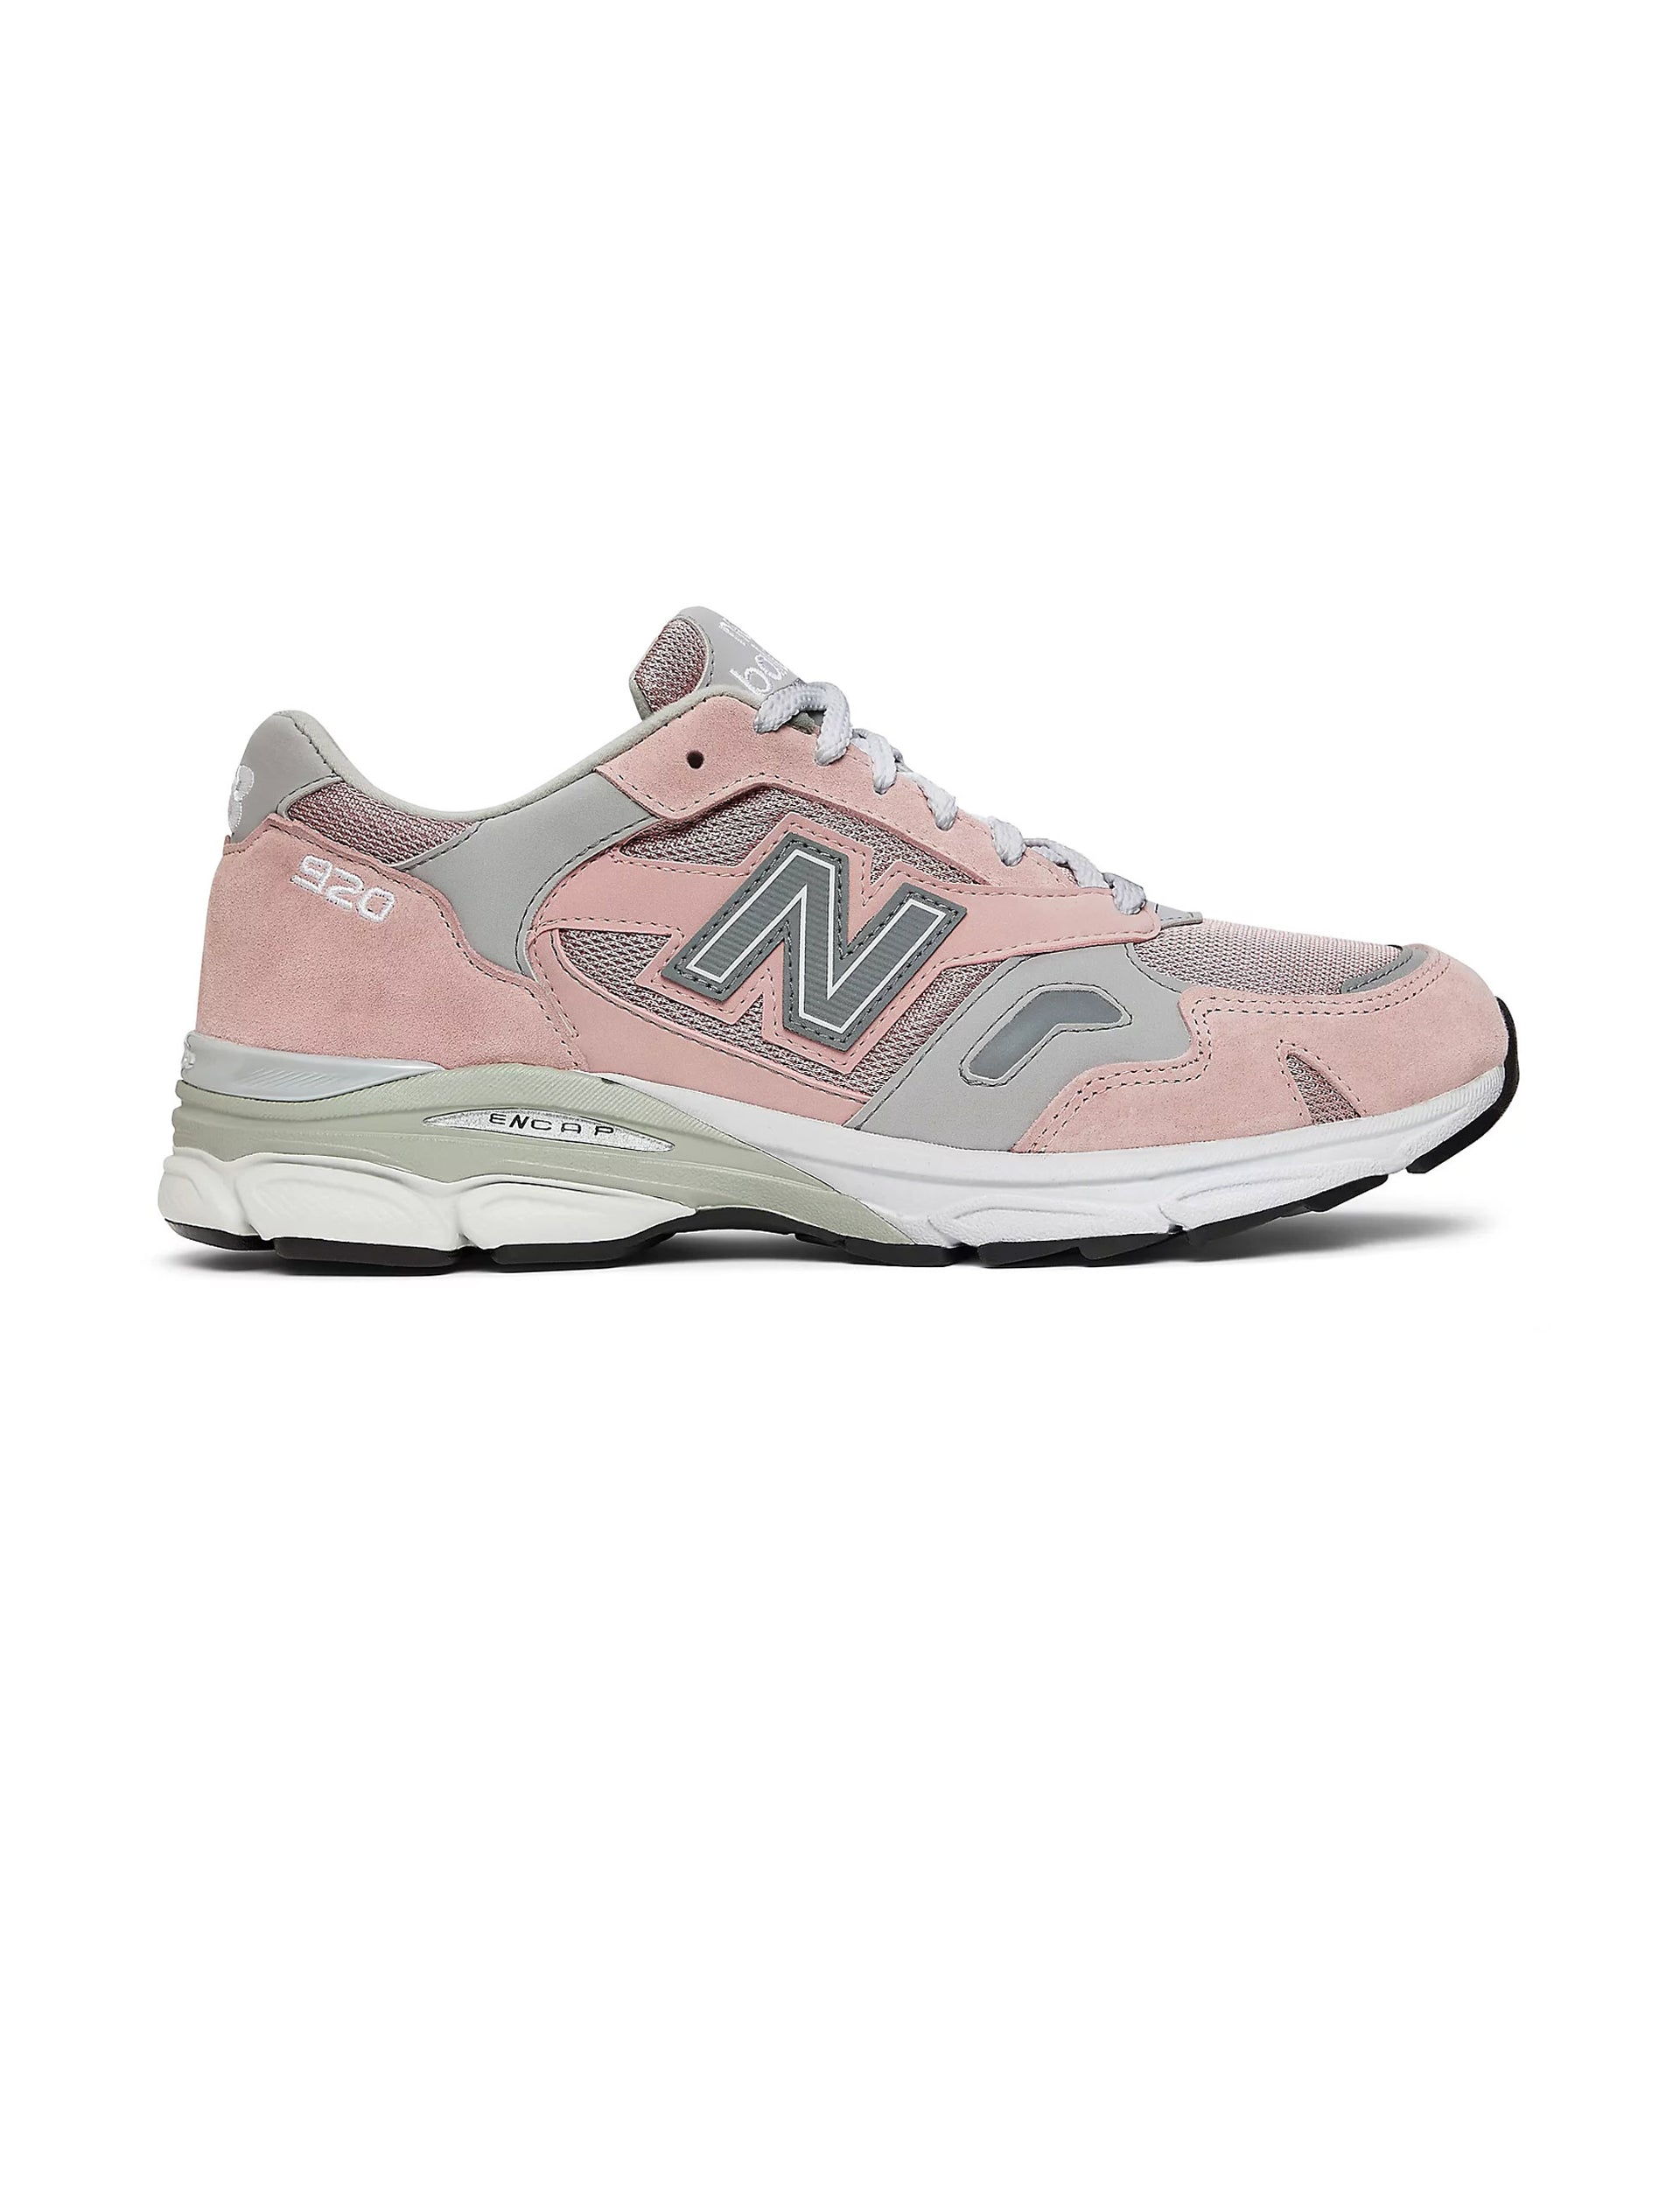 NEW BALANCE MADE in UK 920 PINK